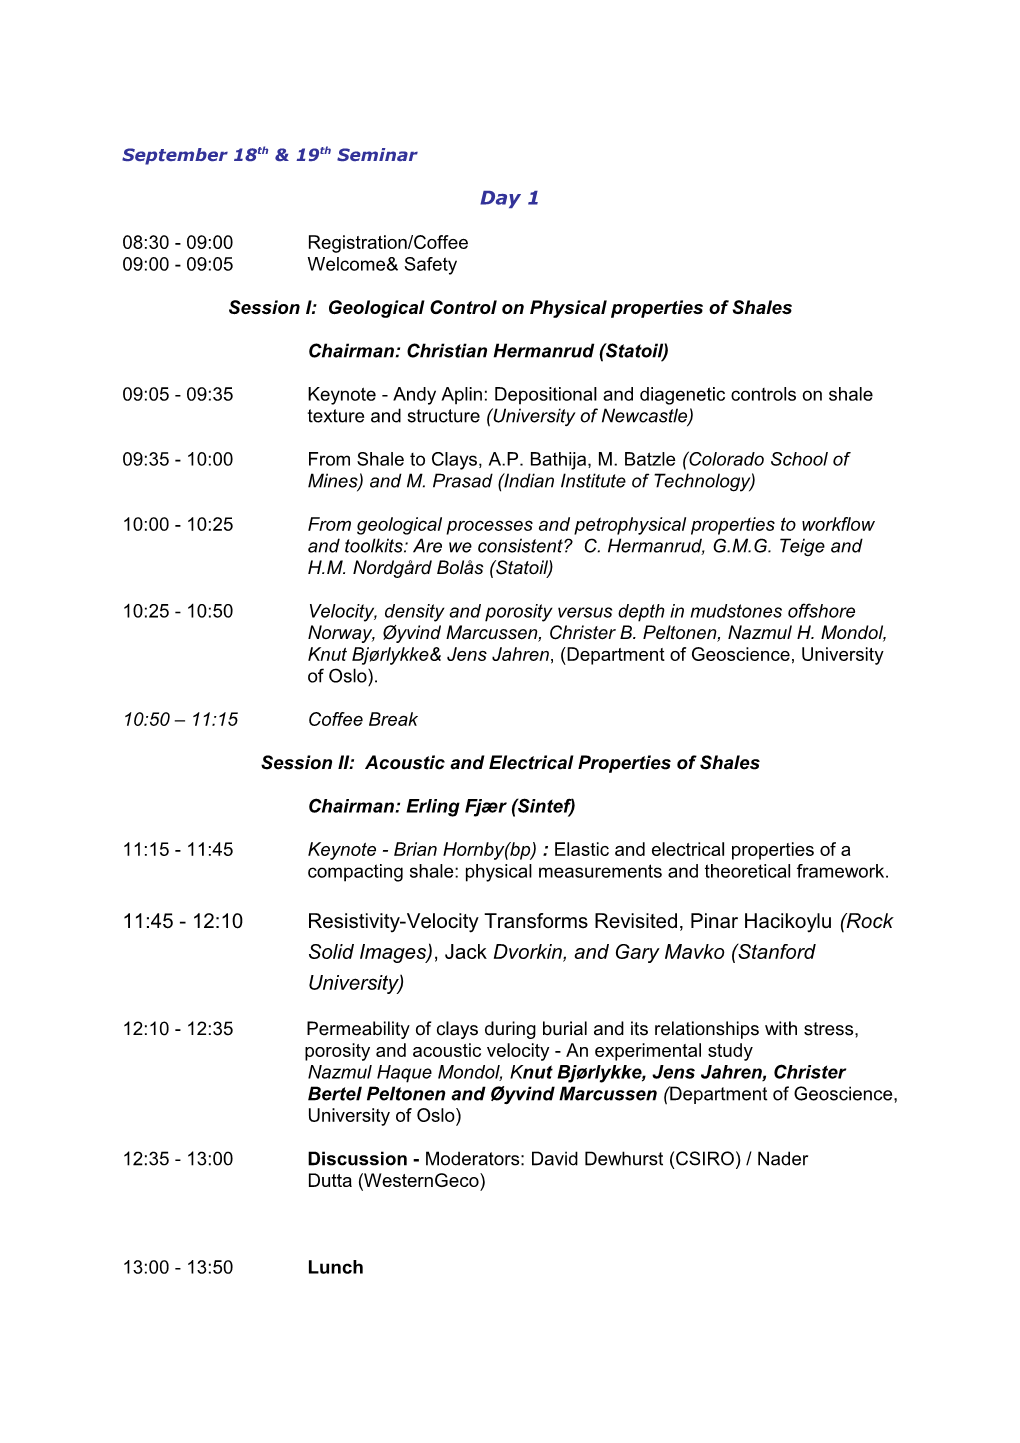 Session I: Geological Control on Physical Properties of Shales